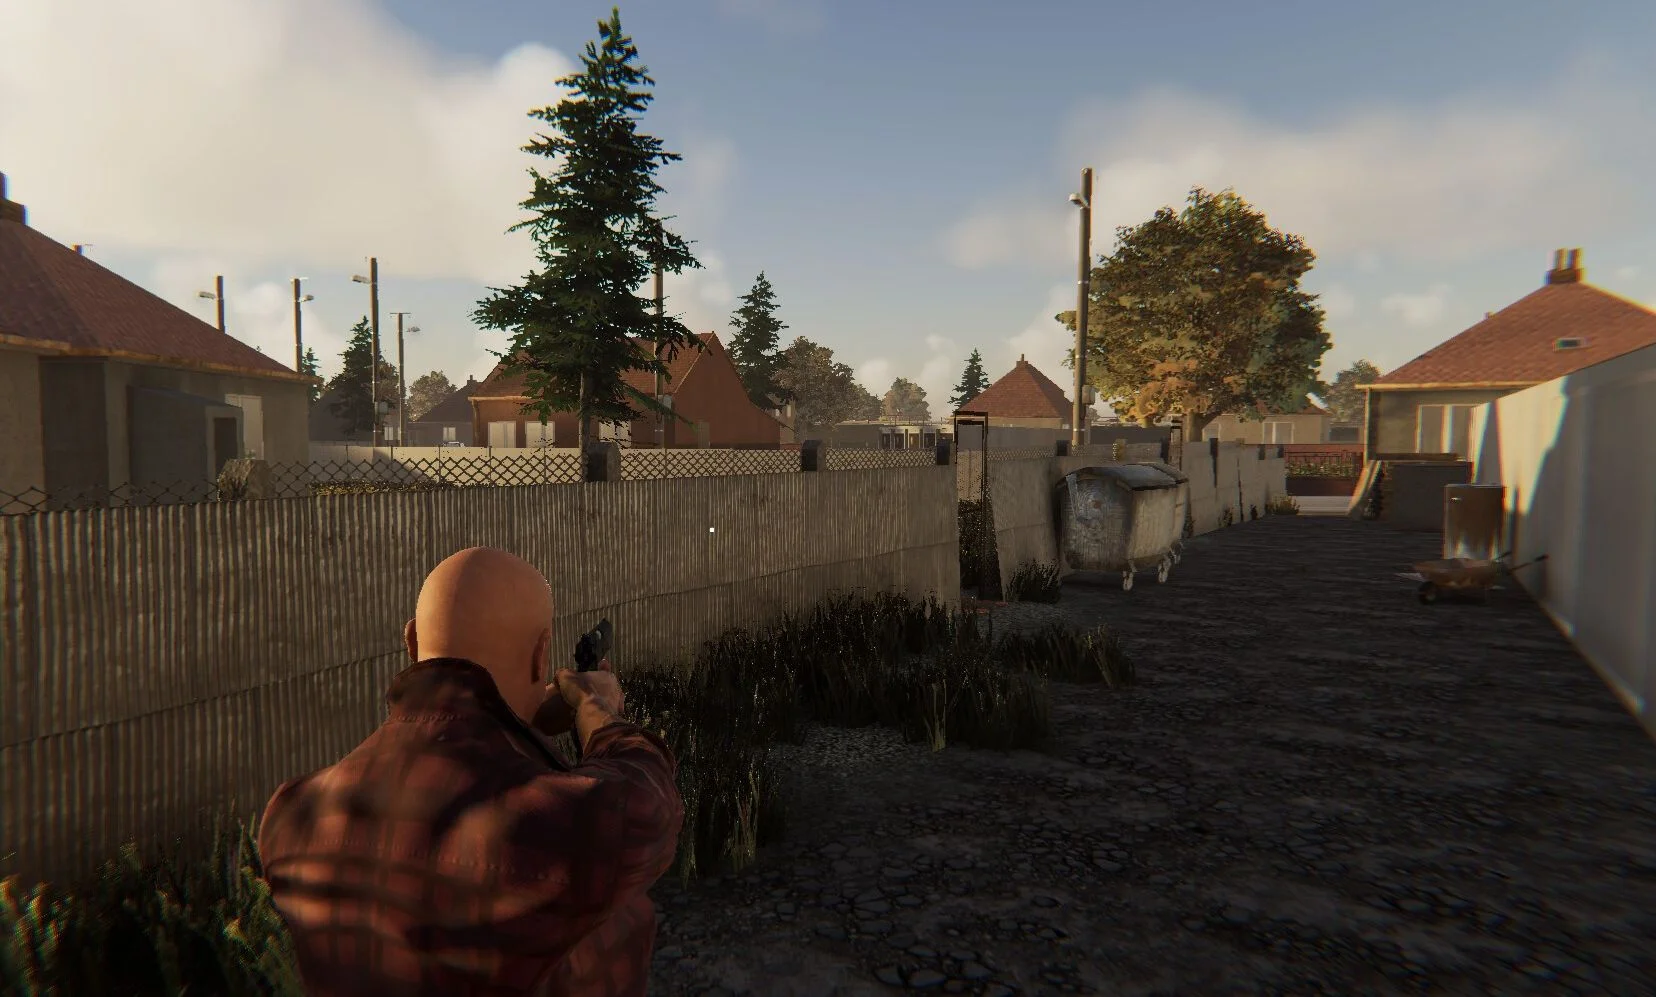 A GTA-like action game has been released, set in Slovakia in the 90s